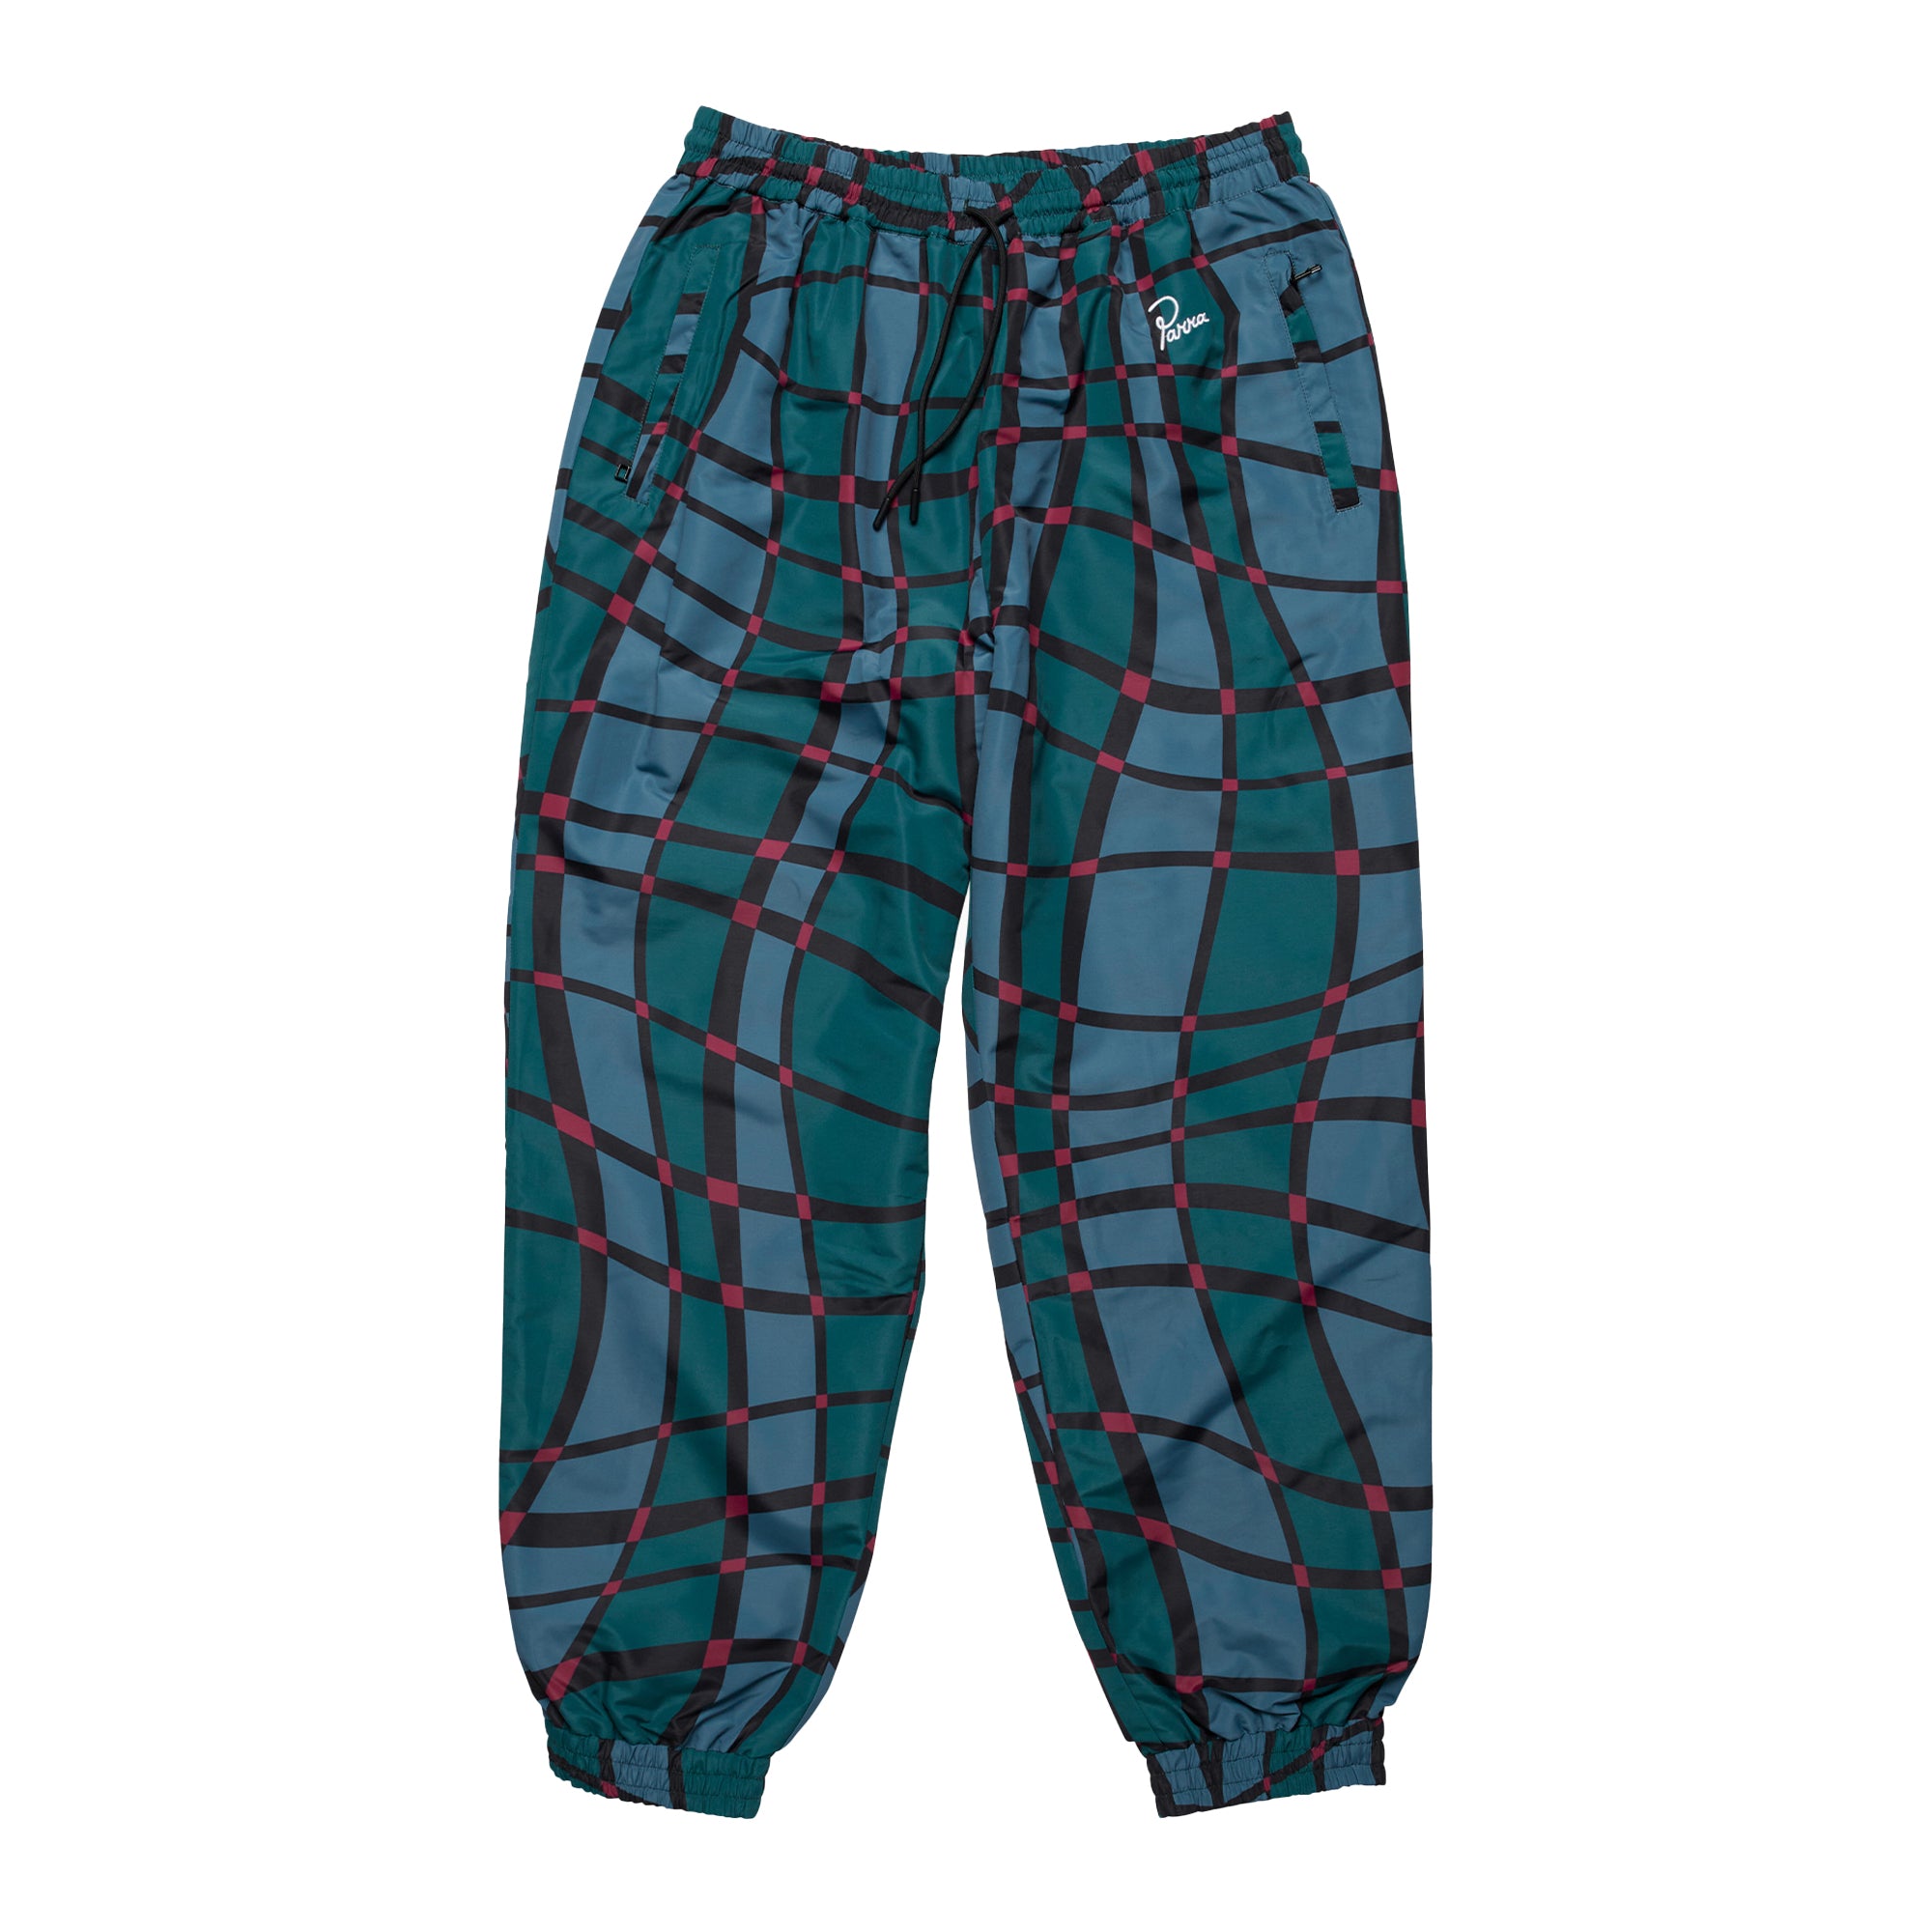 PARRA - SQUARED WAVES PATTERN TRACK PANTS